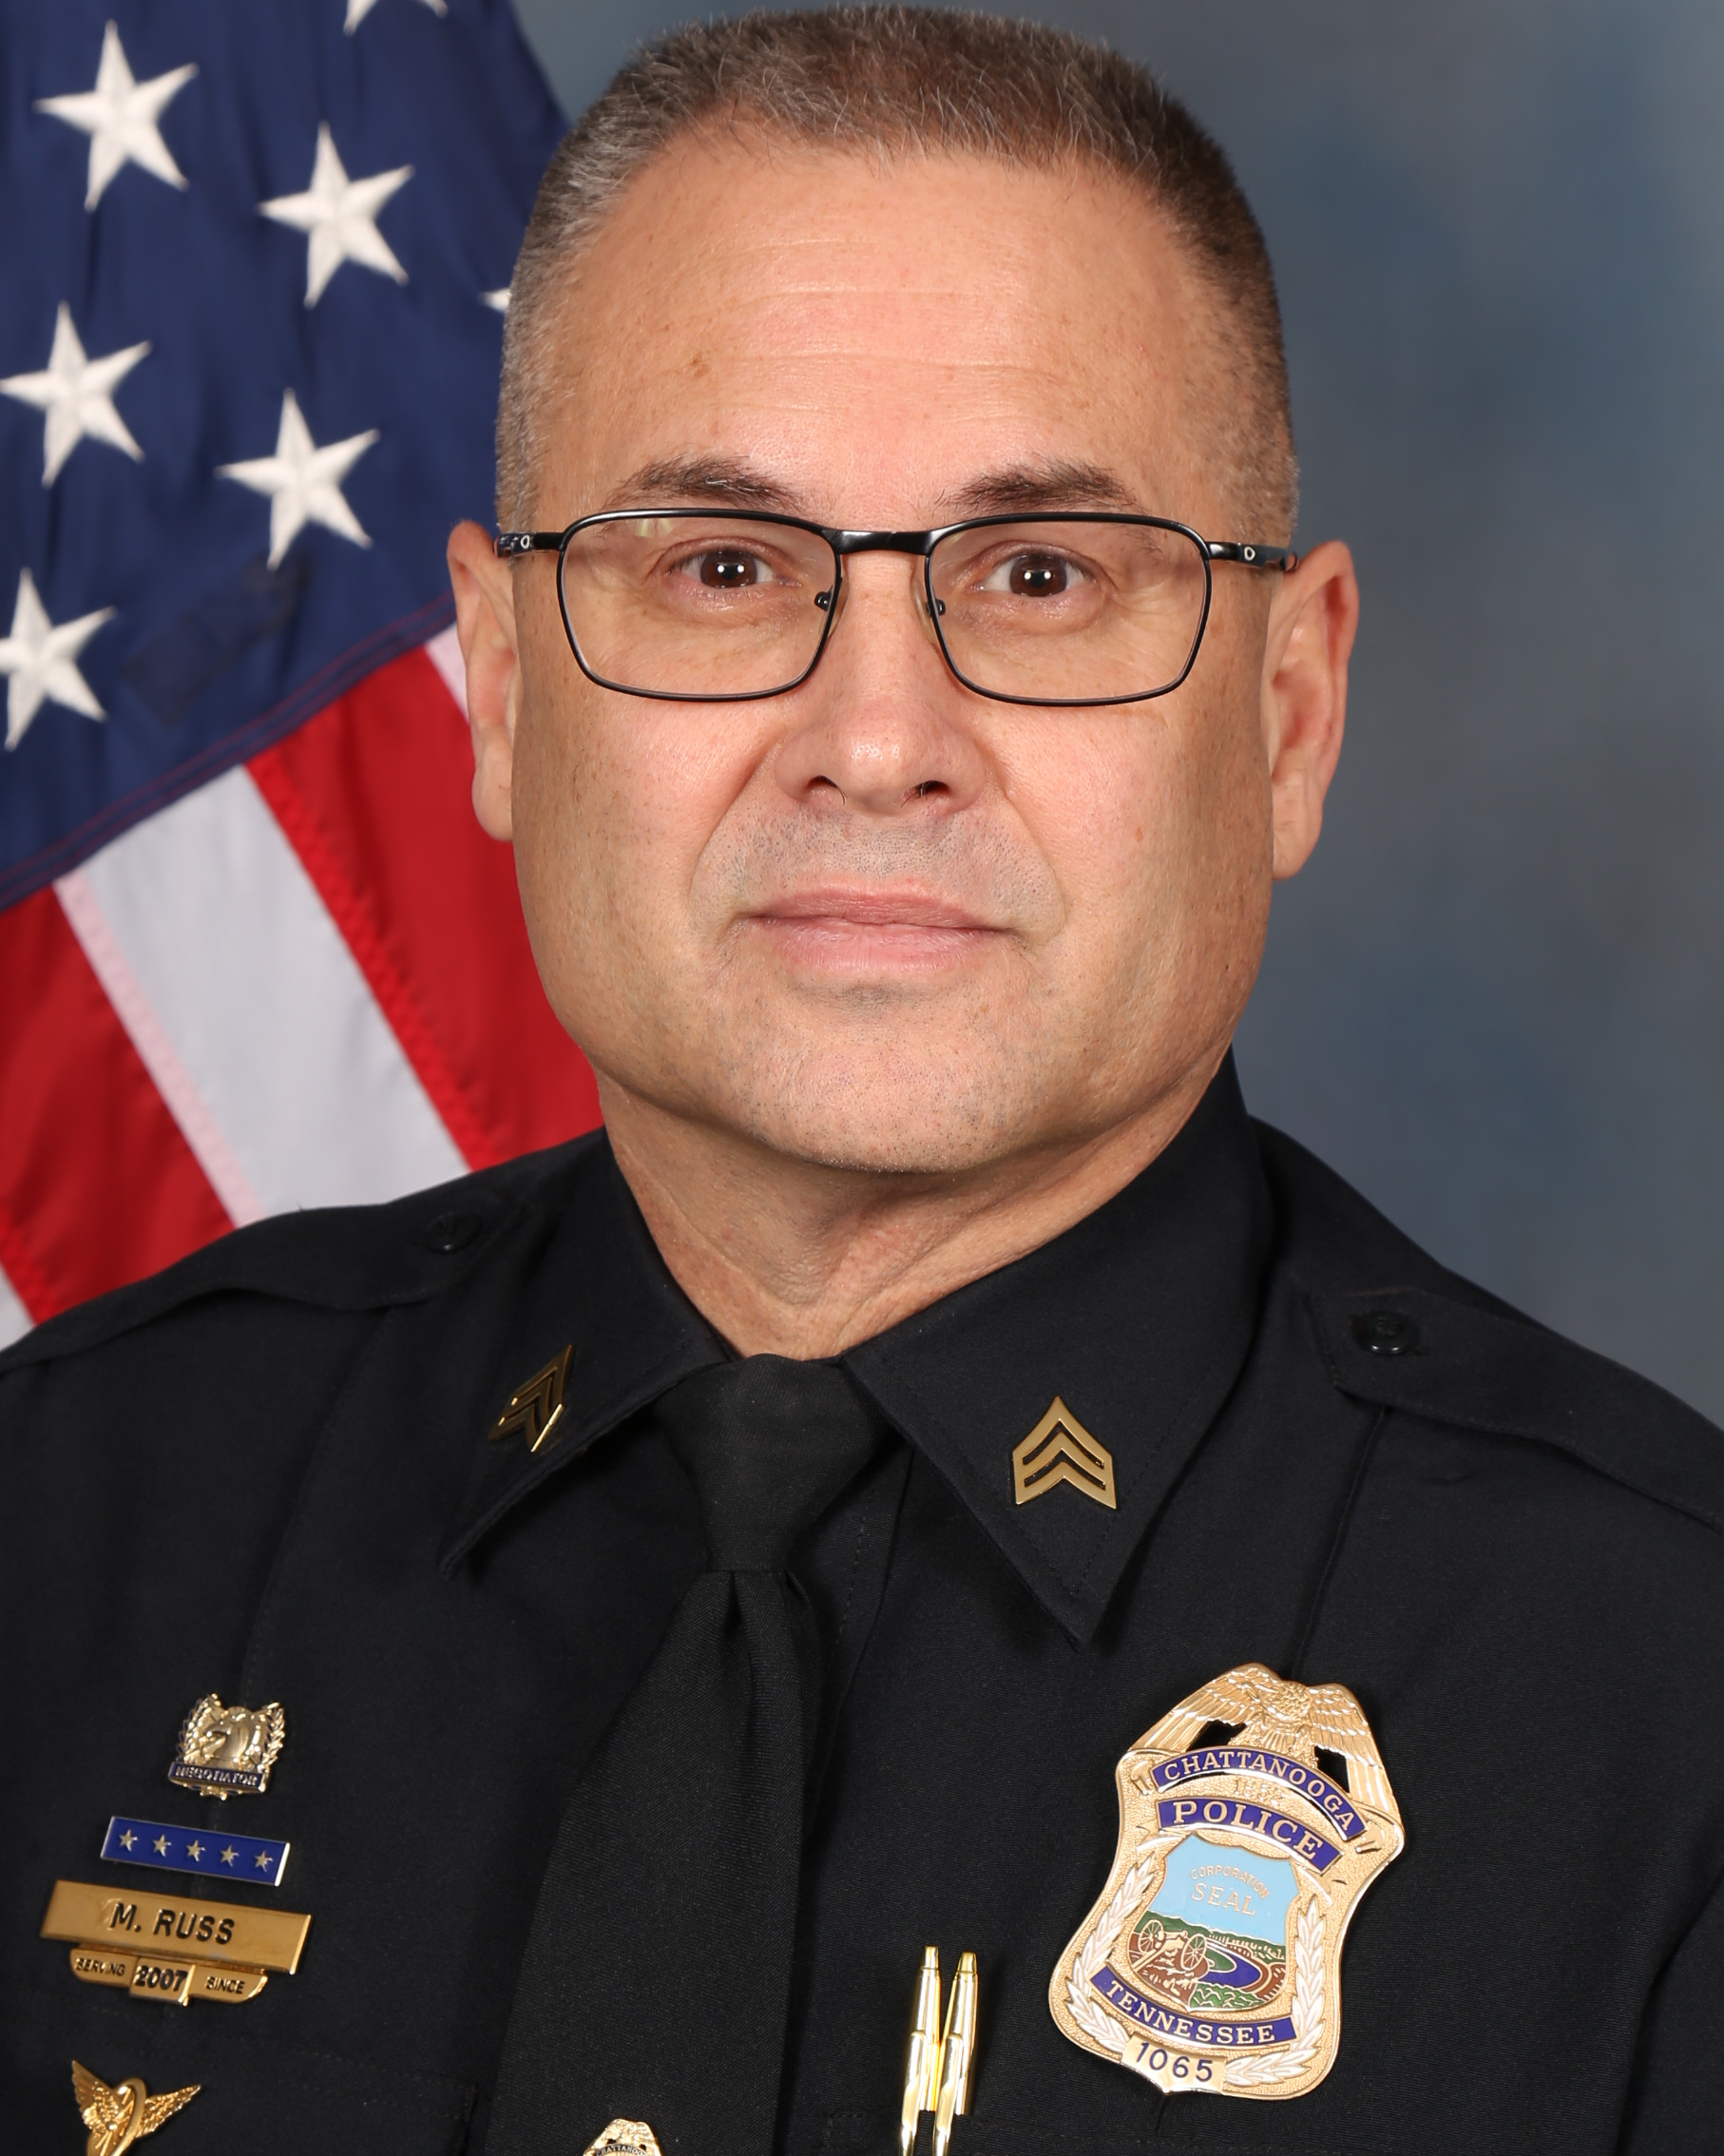 Sergeant James Michael Russ, Chattanooga Police Department, Tennessee